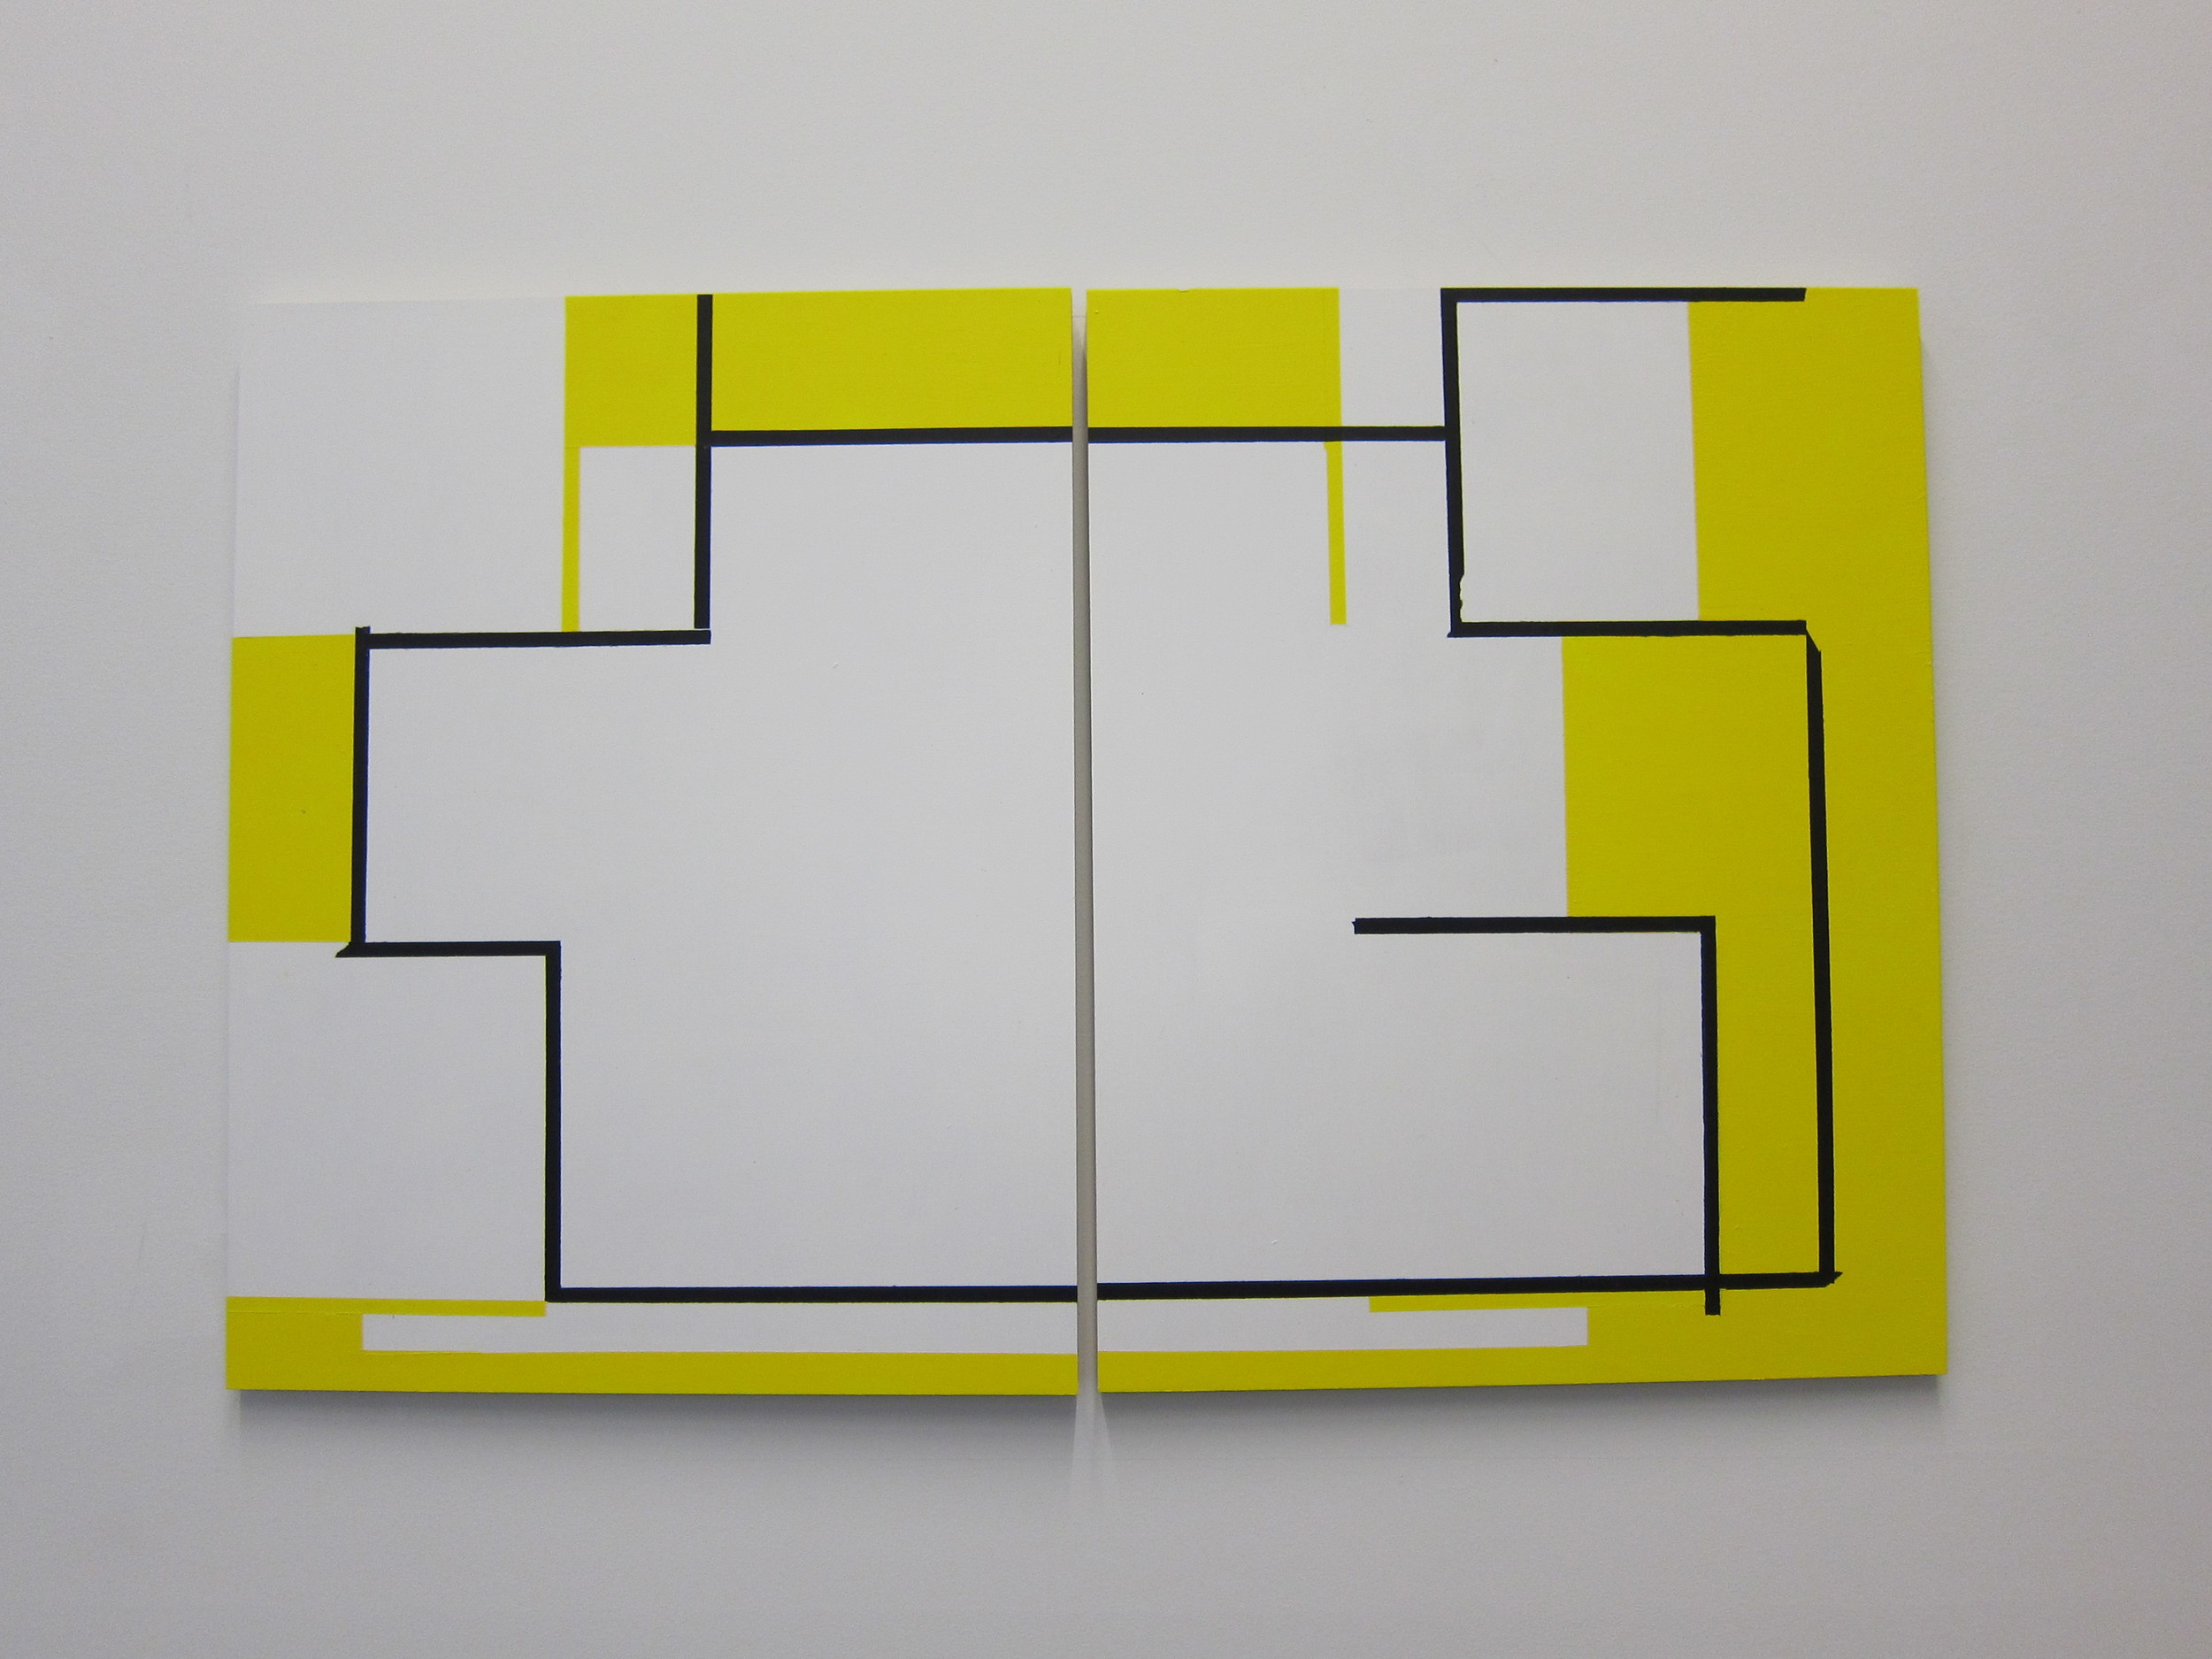  Marjorie Welish Indecidability of the Sign: Frame 28 2011 Acrylic on Panel  18x28 inches (two panels)   